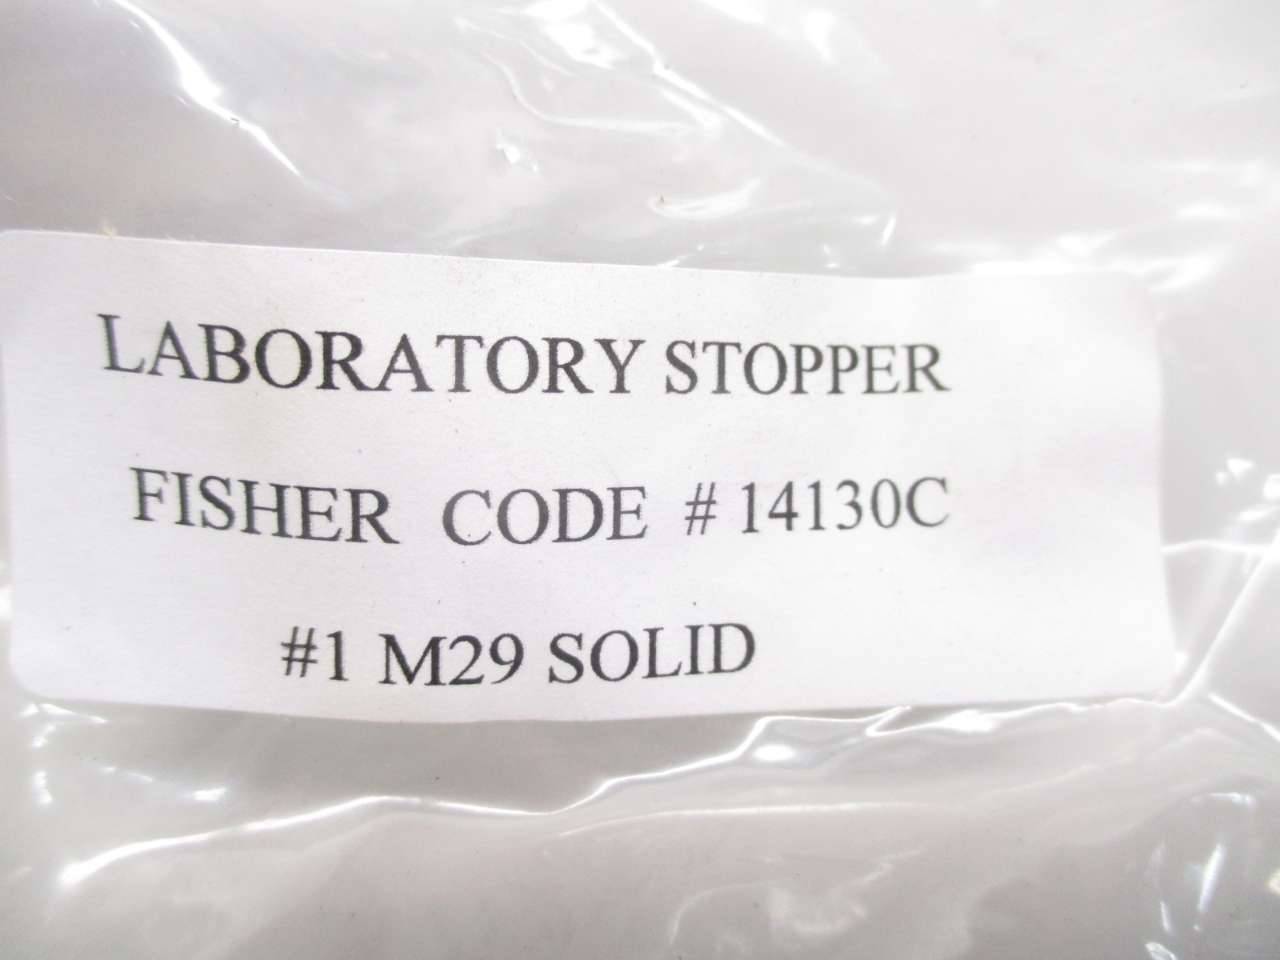 Lot 57 New Fisher Scientific 14130C Size 1 Laboratory Stoppers